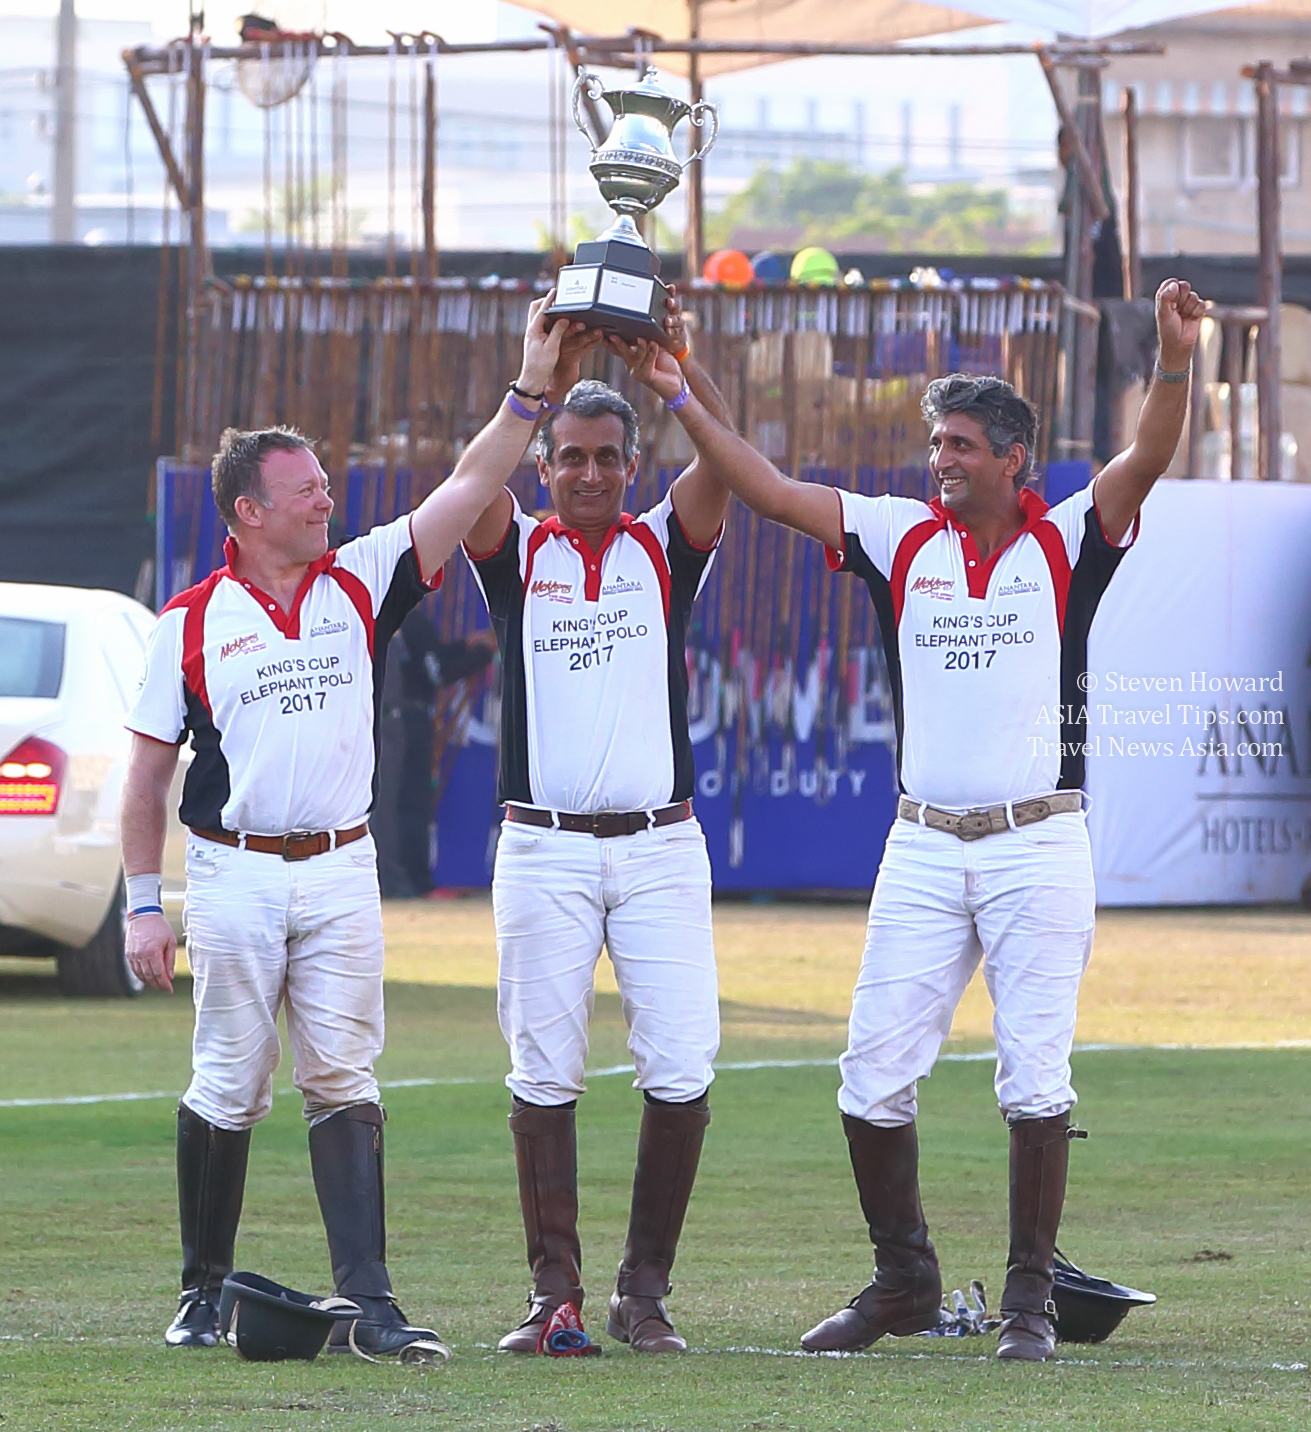 Team Mekhong beat the King Power Team 10-11 to win the 2017 King's Cup Elephant Polo Tournament